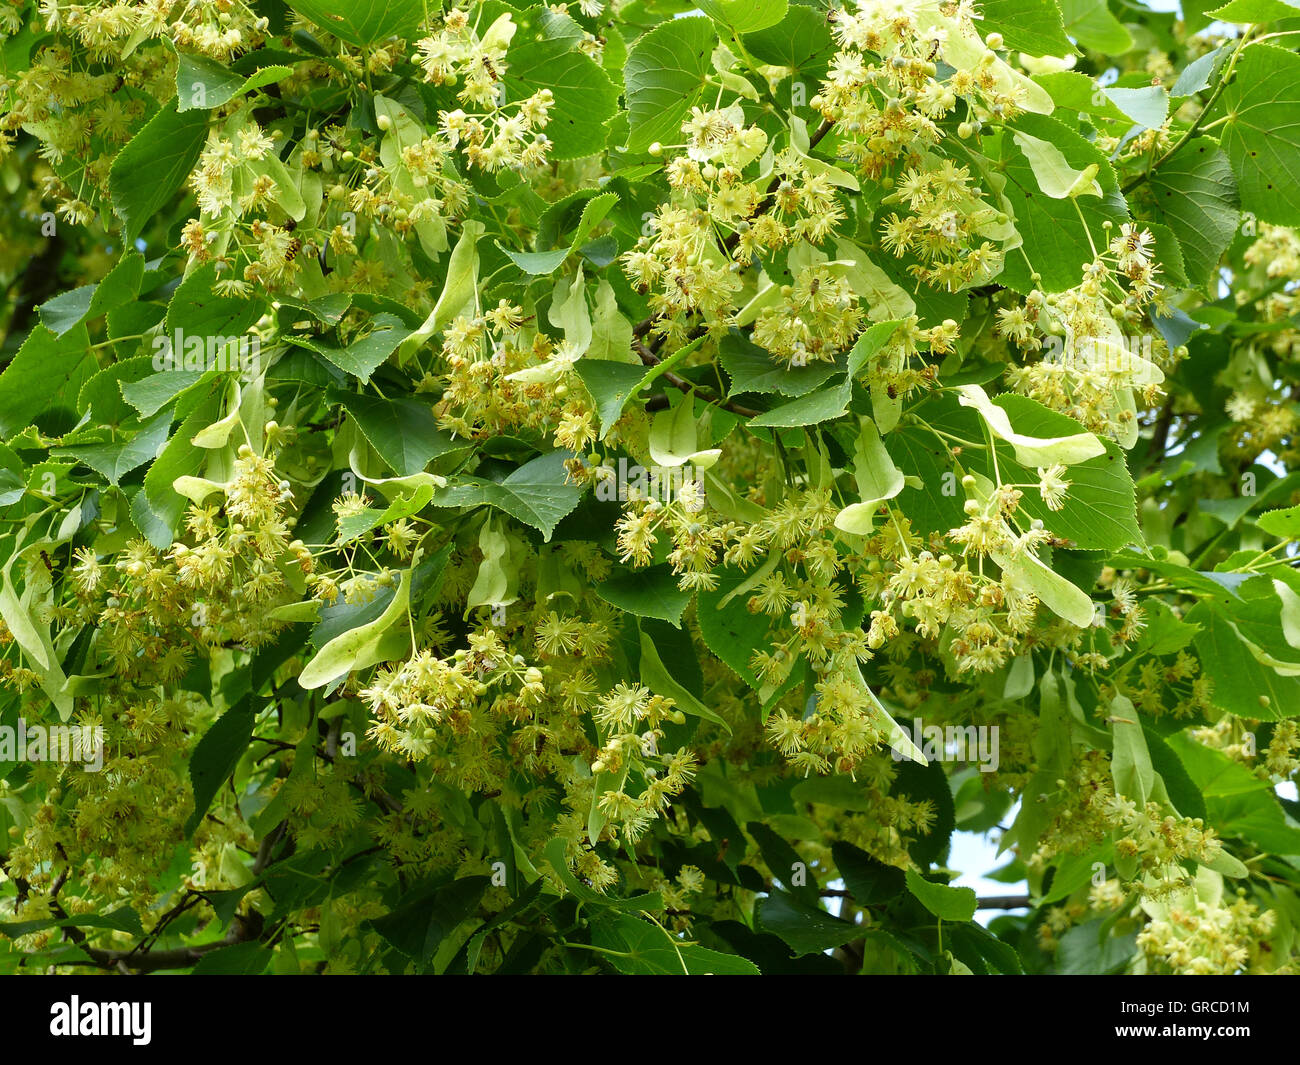 Linden Blossoms, Blossoming Linden Tree Stock Photo